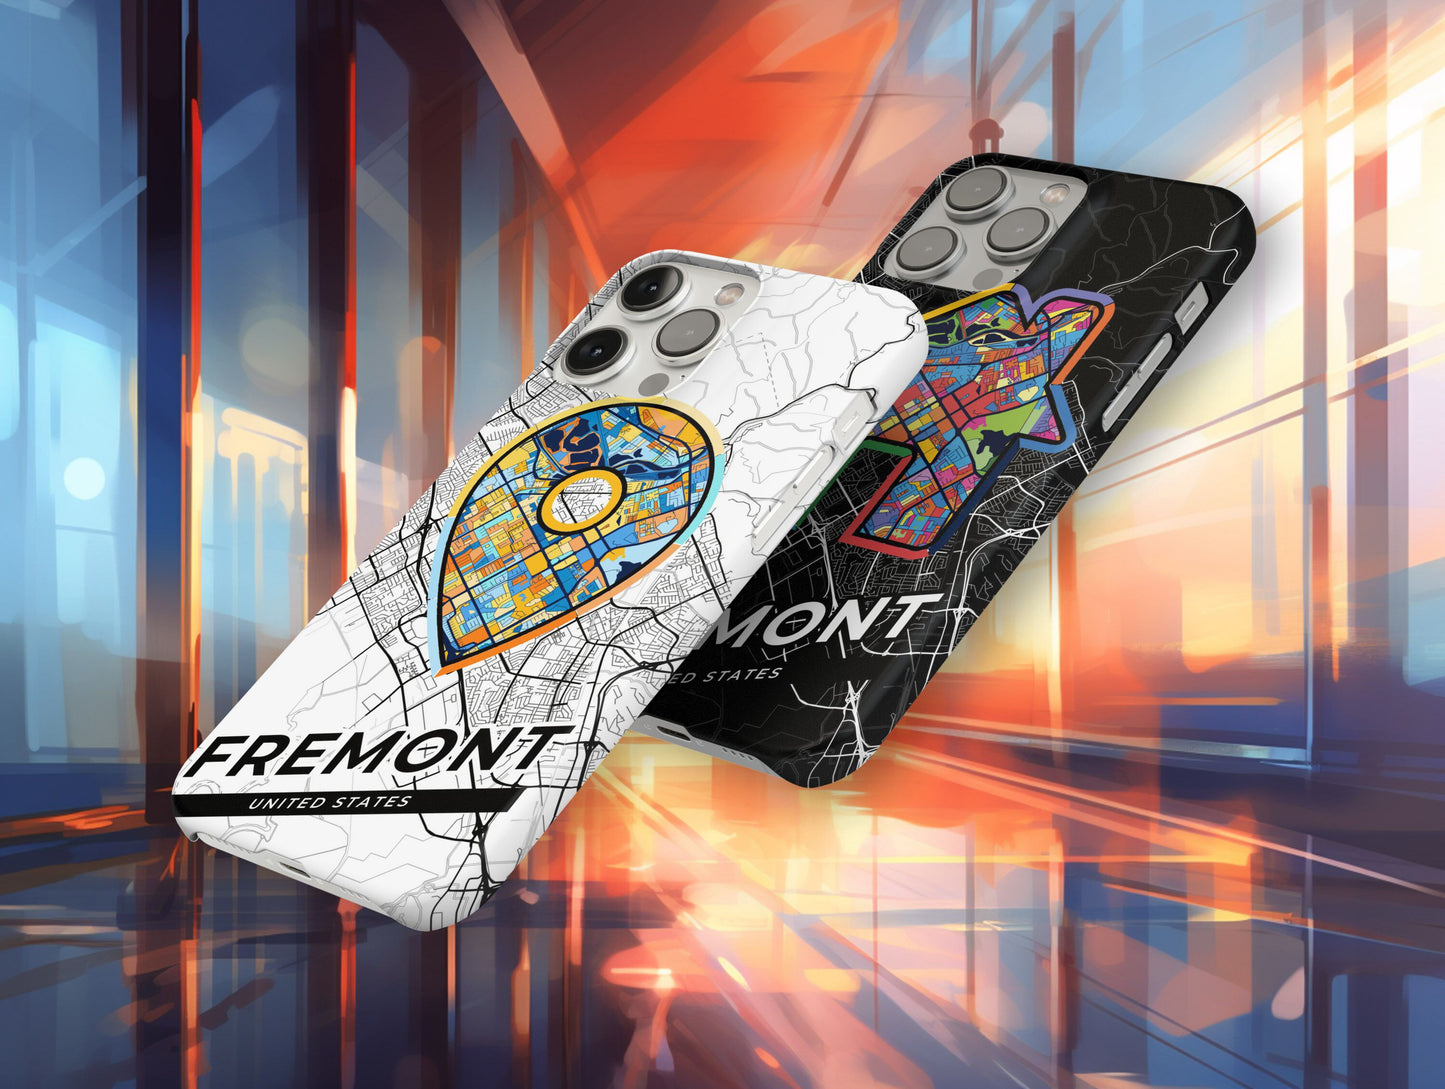 Fremont California slim phone case with colorful icon. Birthday, wedding or housewarming gift. Couple match cases.